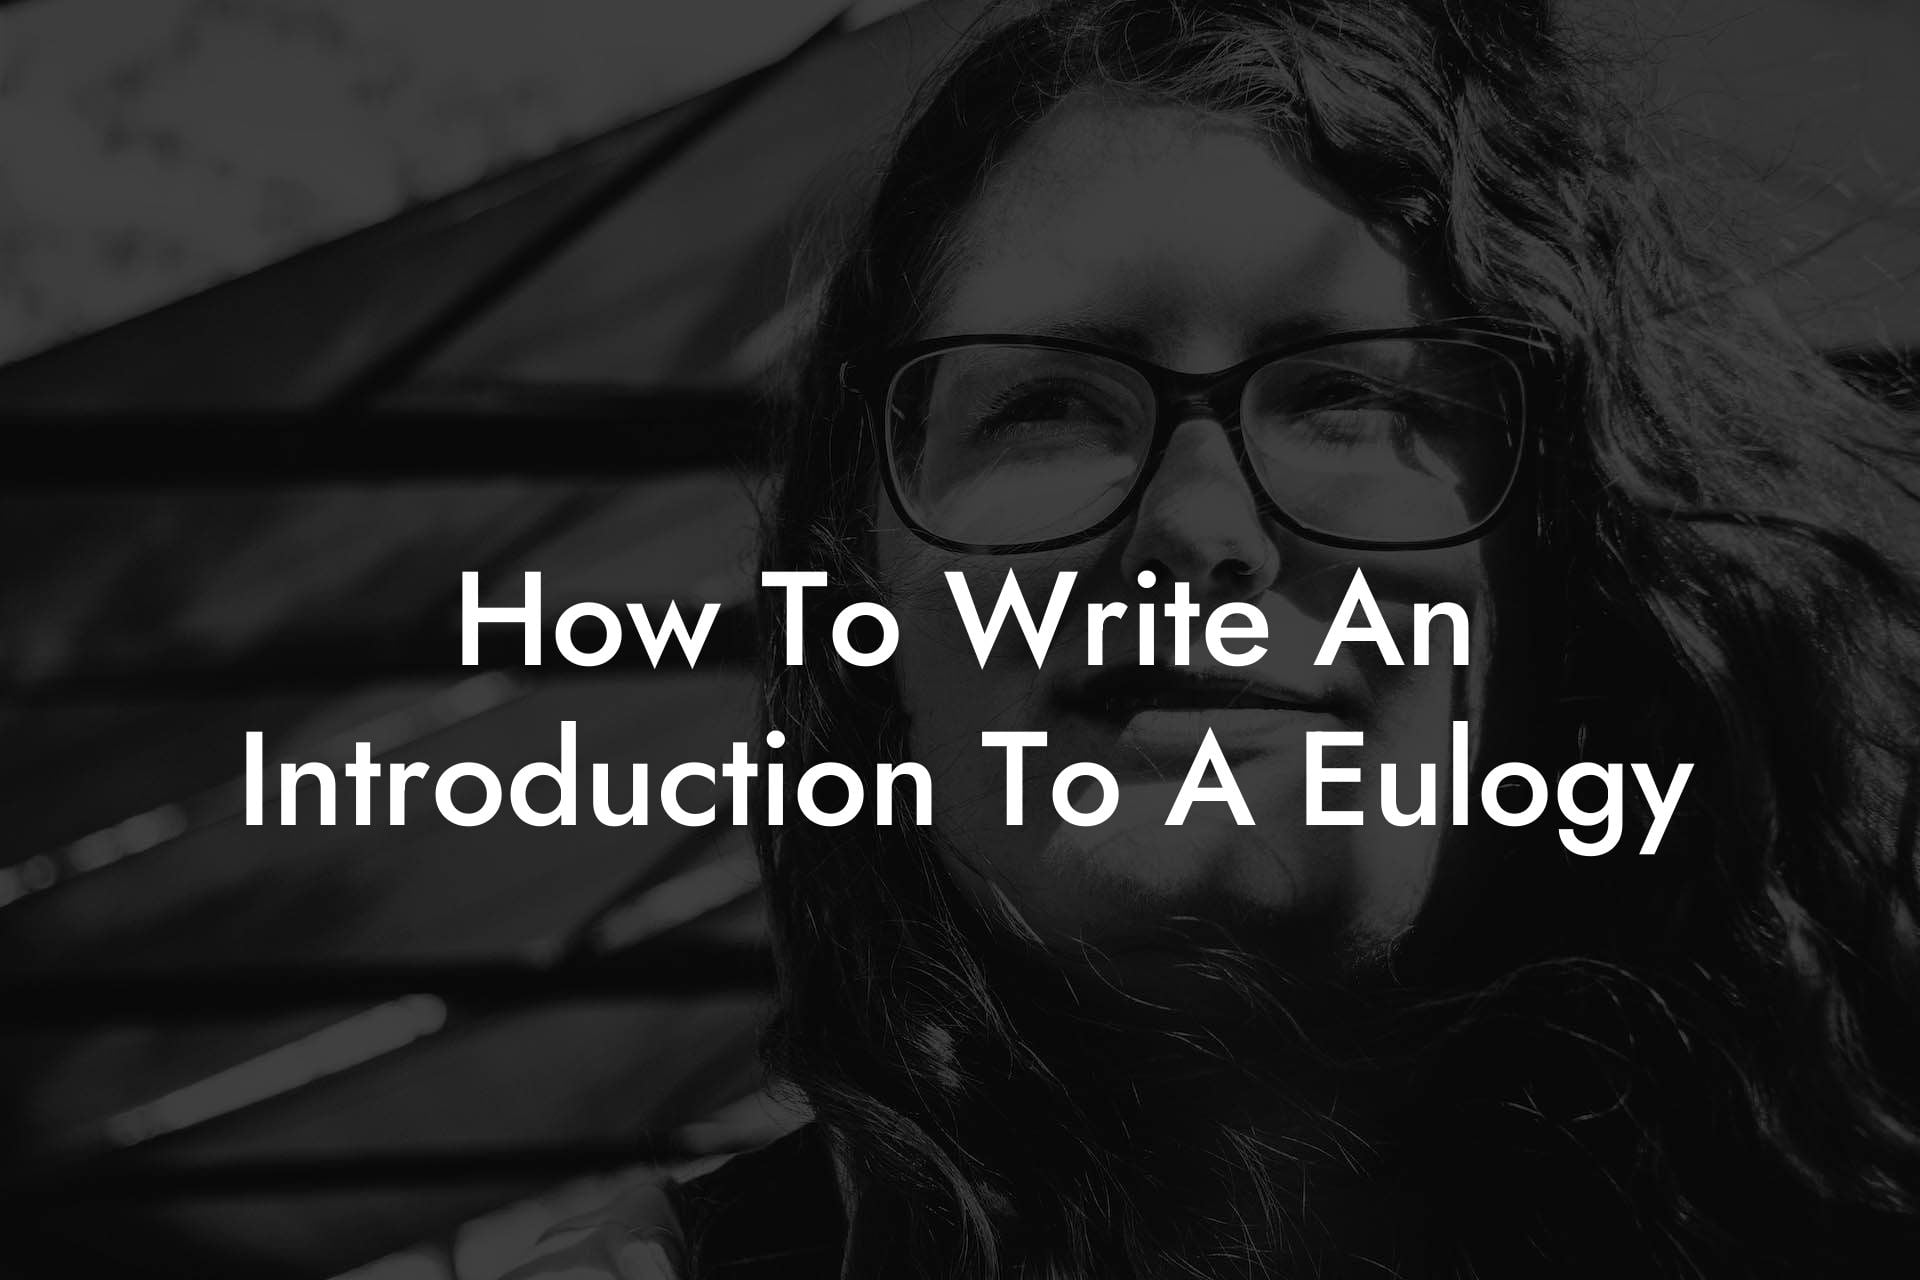 How To Write An Introduction To A Eulogy